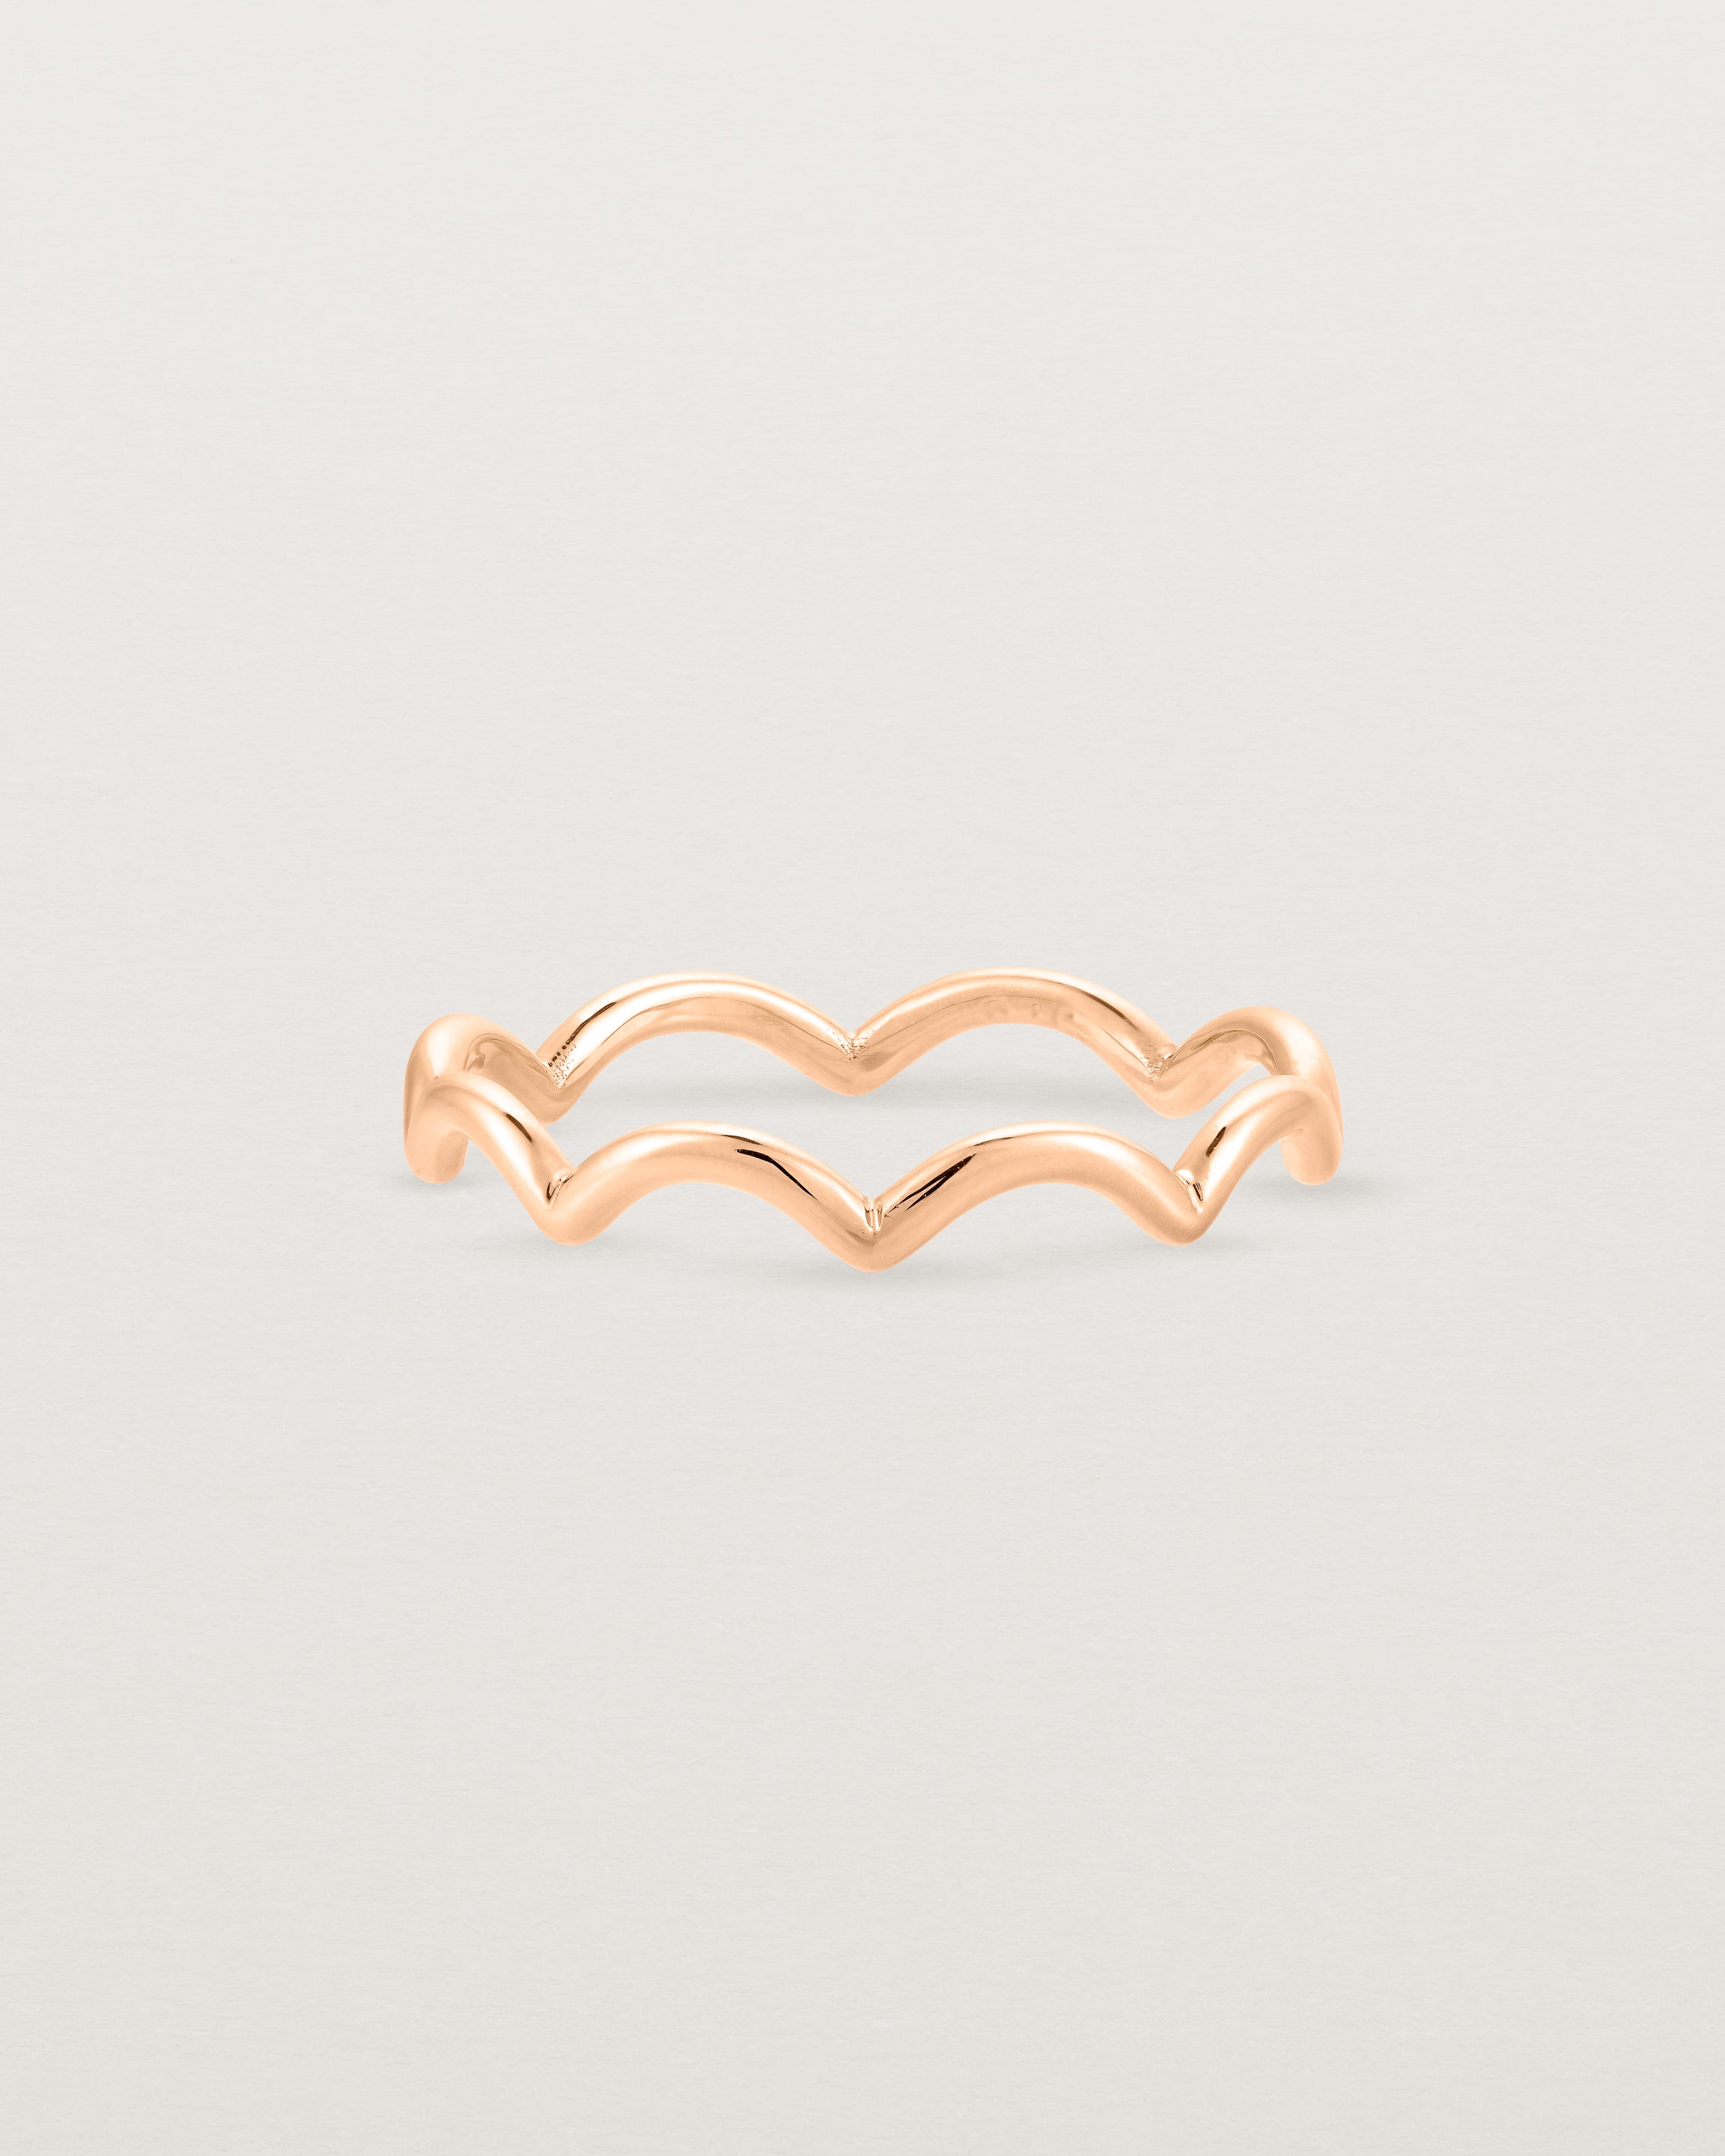 Front view of the Lai Ring in Rose Gold.